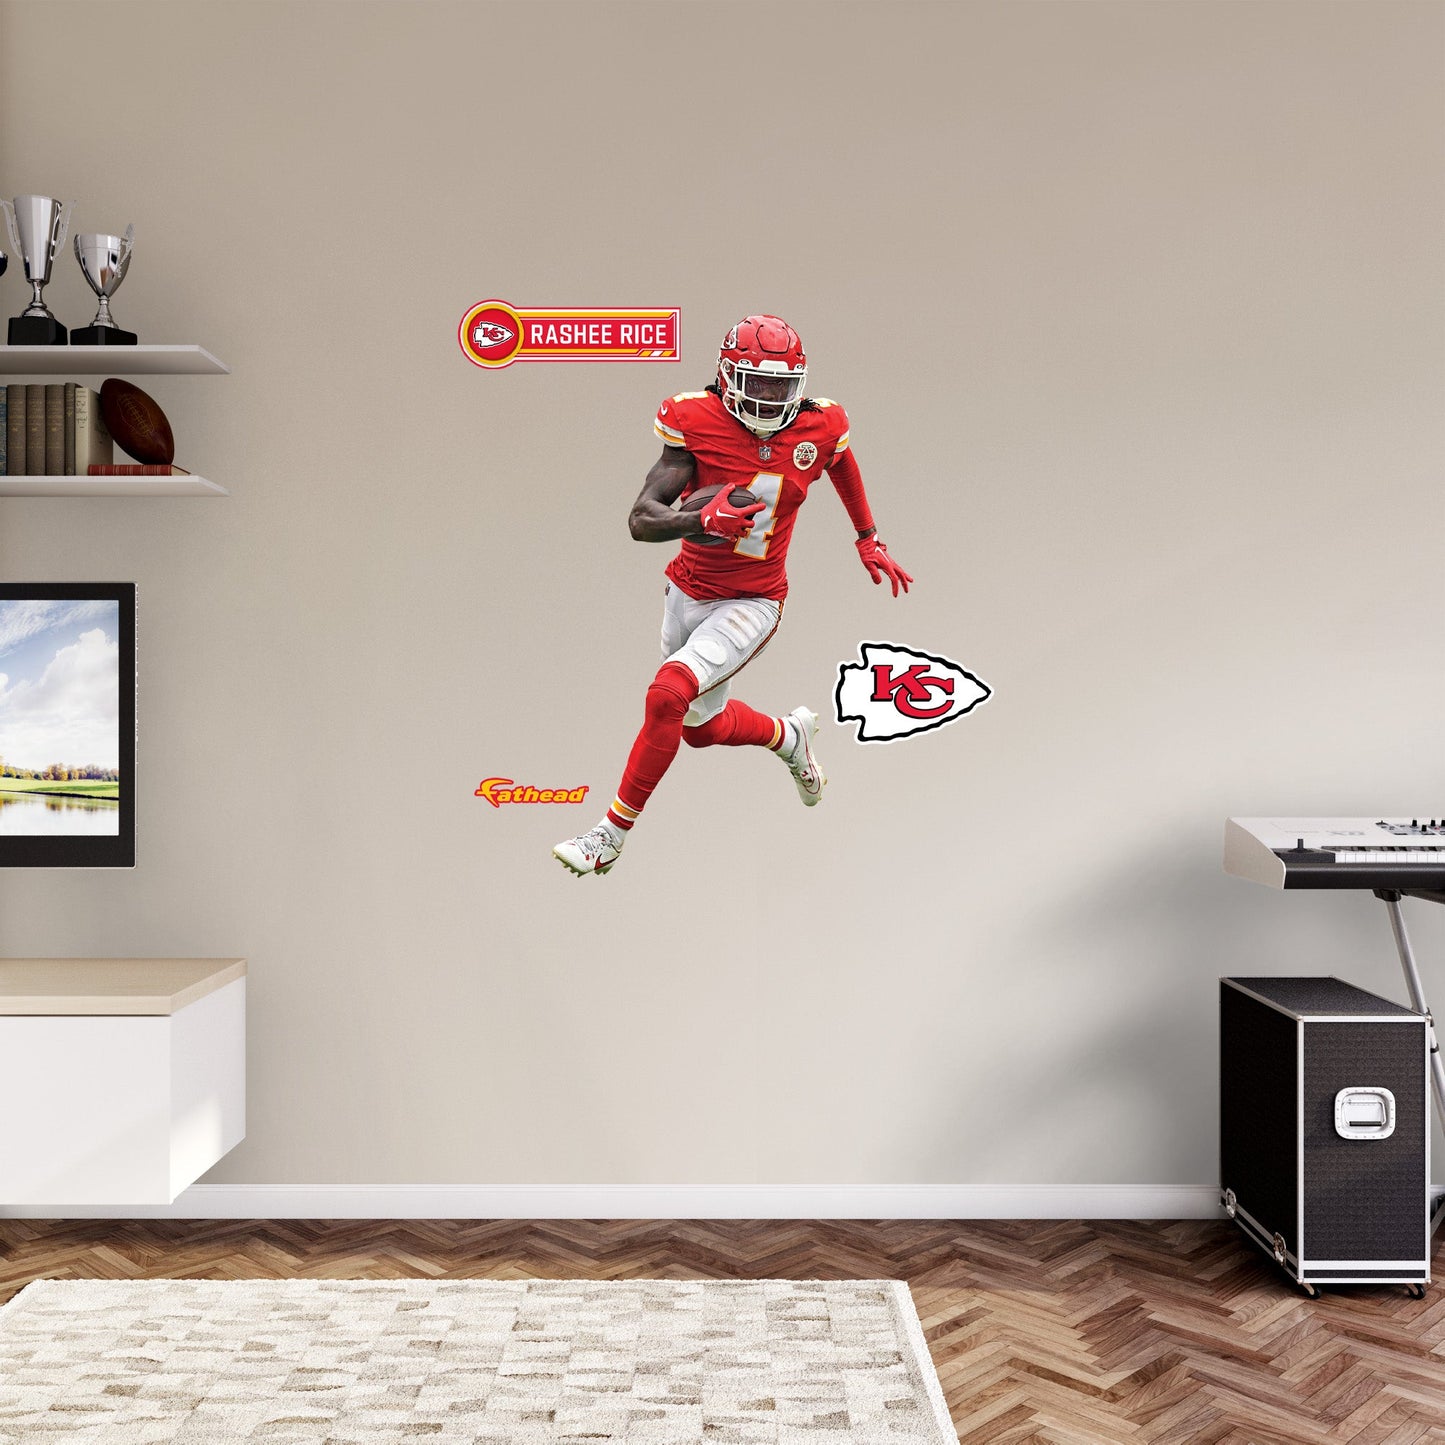 Kansas City Chiefs: Rashee Rice         - Officially Licensed NFL Removable     Adhesive Decal